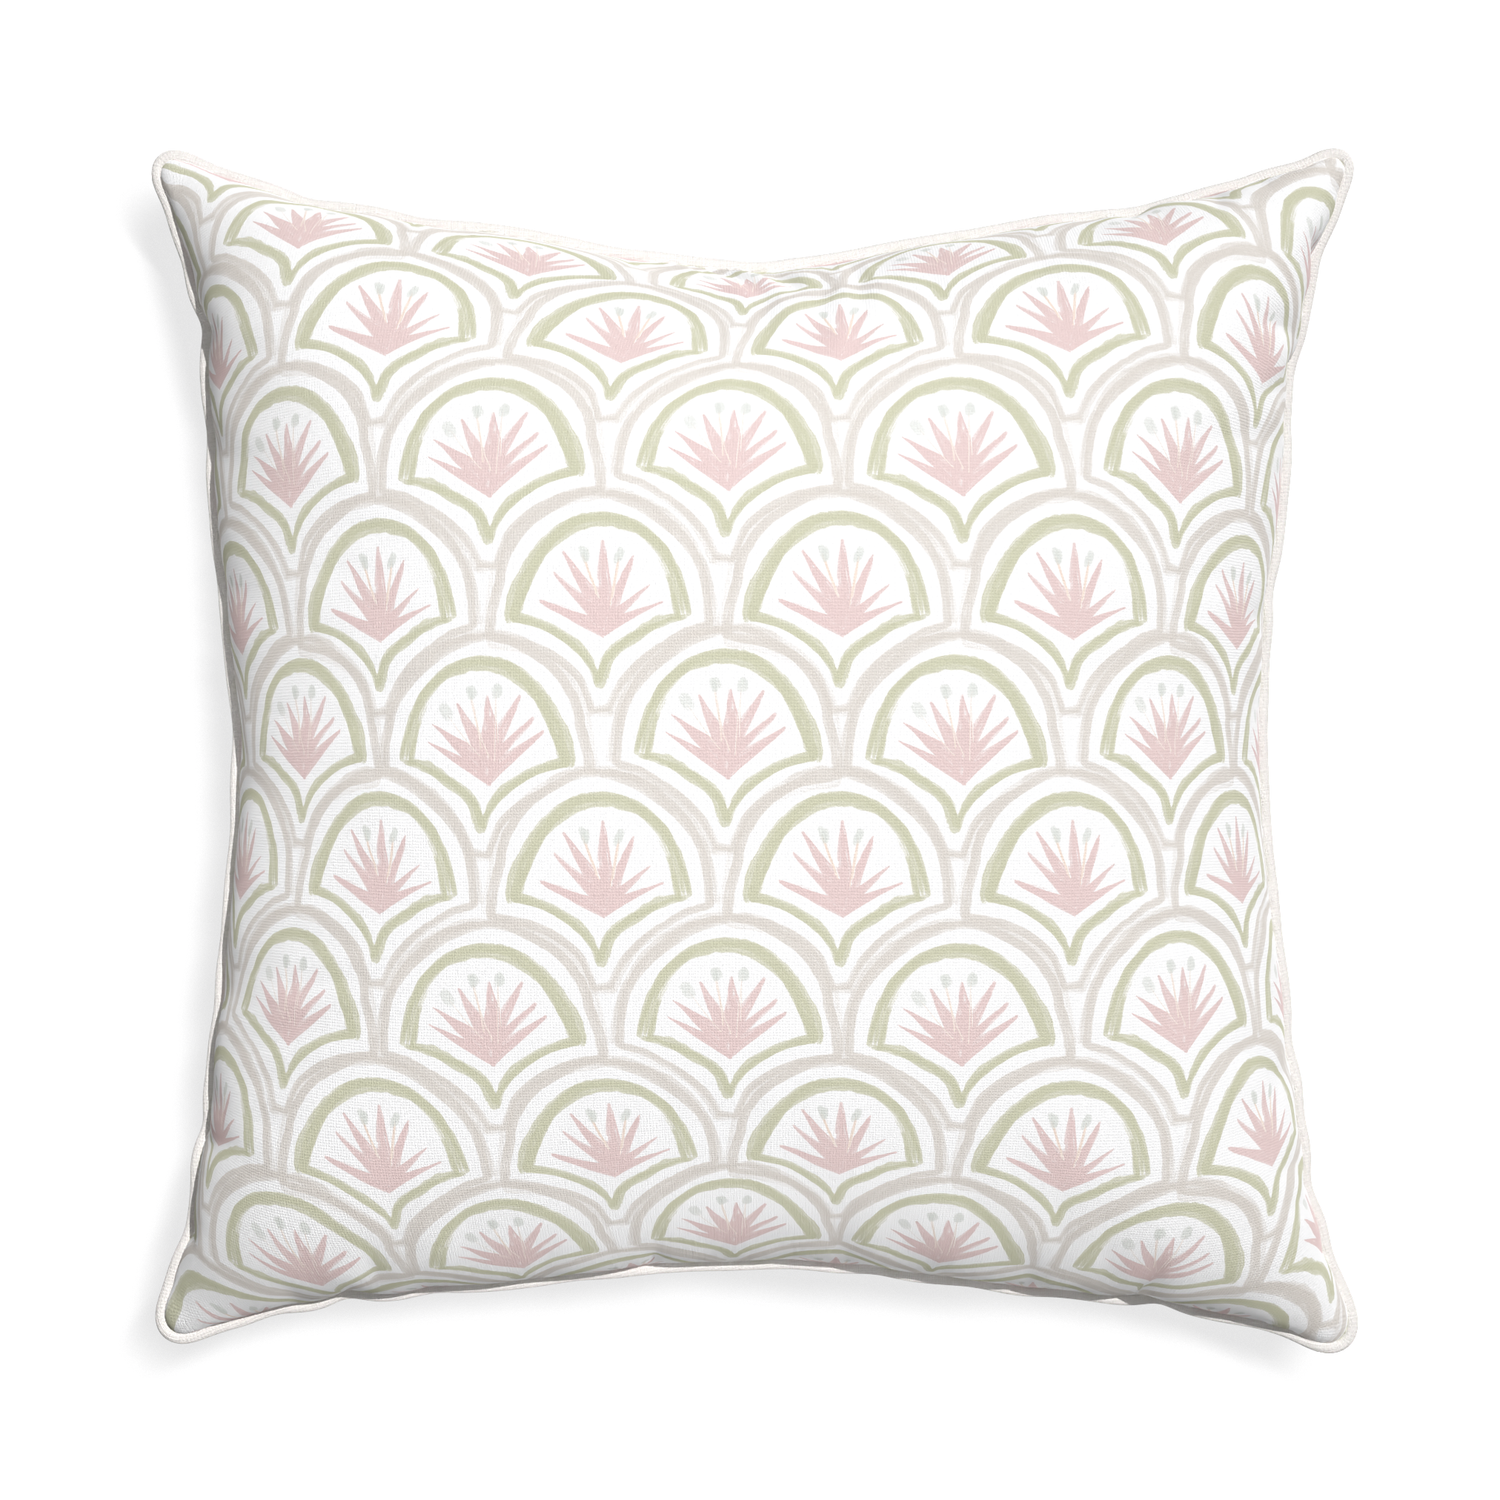 Euro-sham thatcher rose custom pink & green palmpillow with snow piping on white background